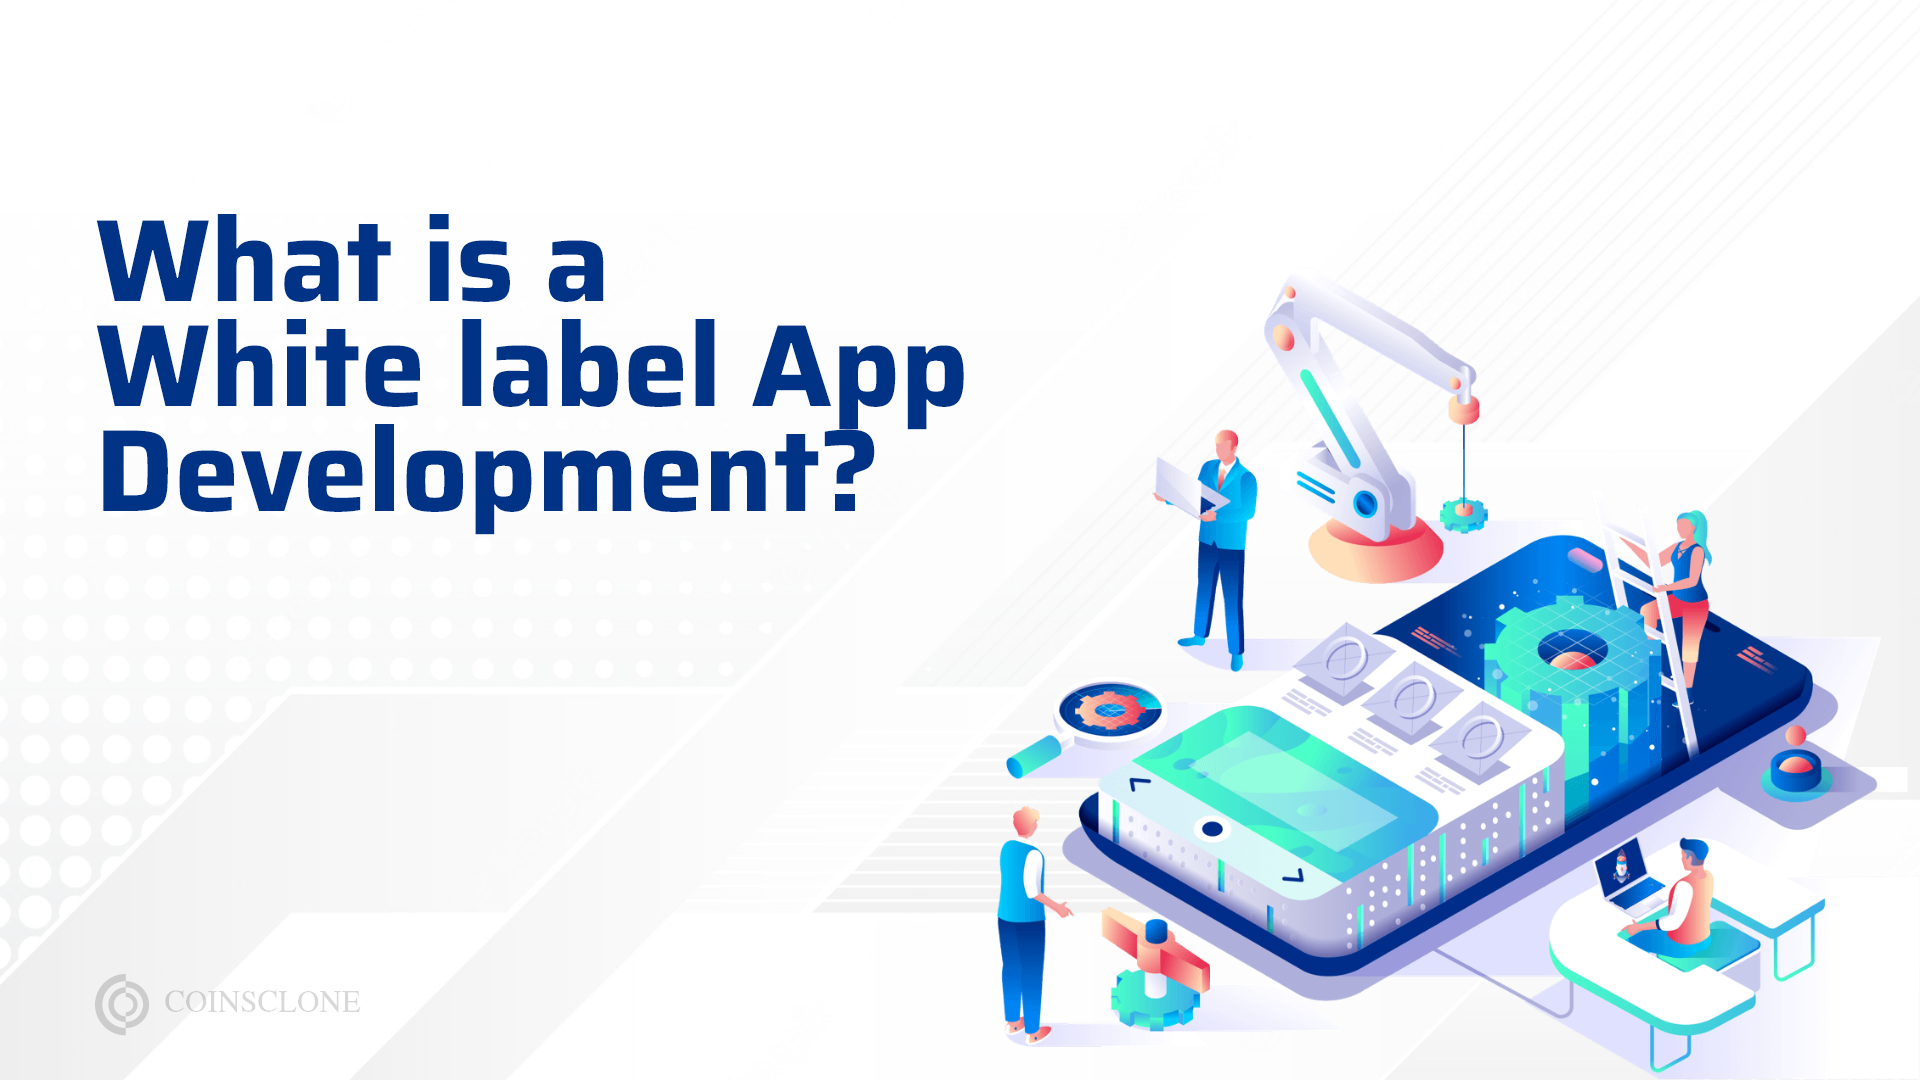 What is a White label App Development